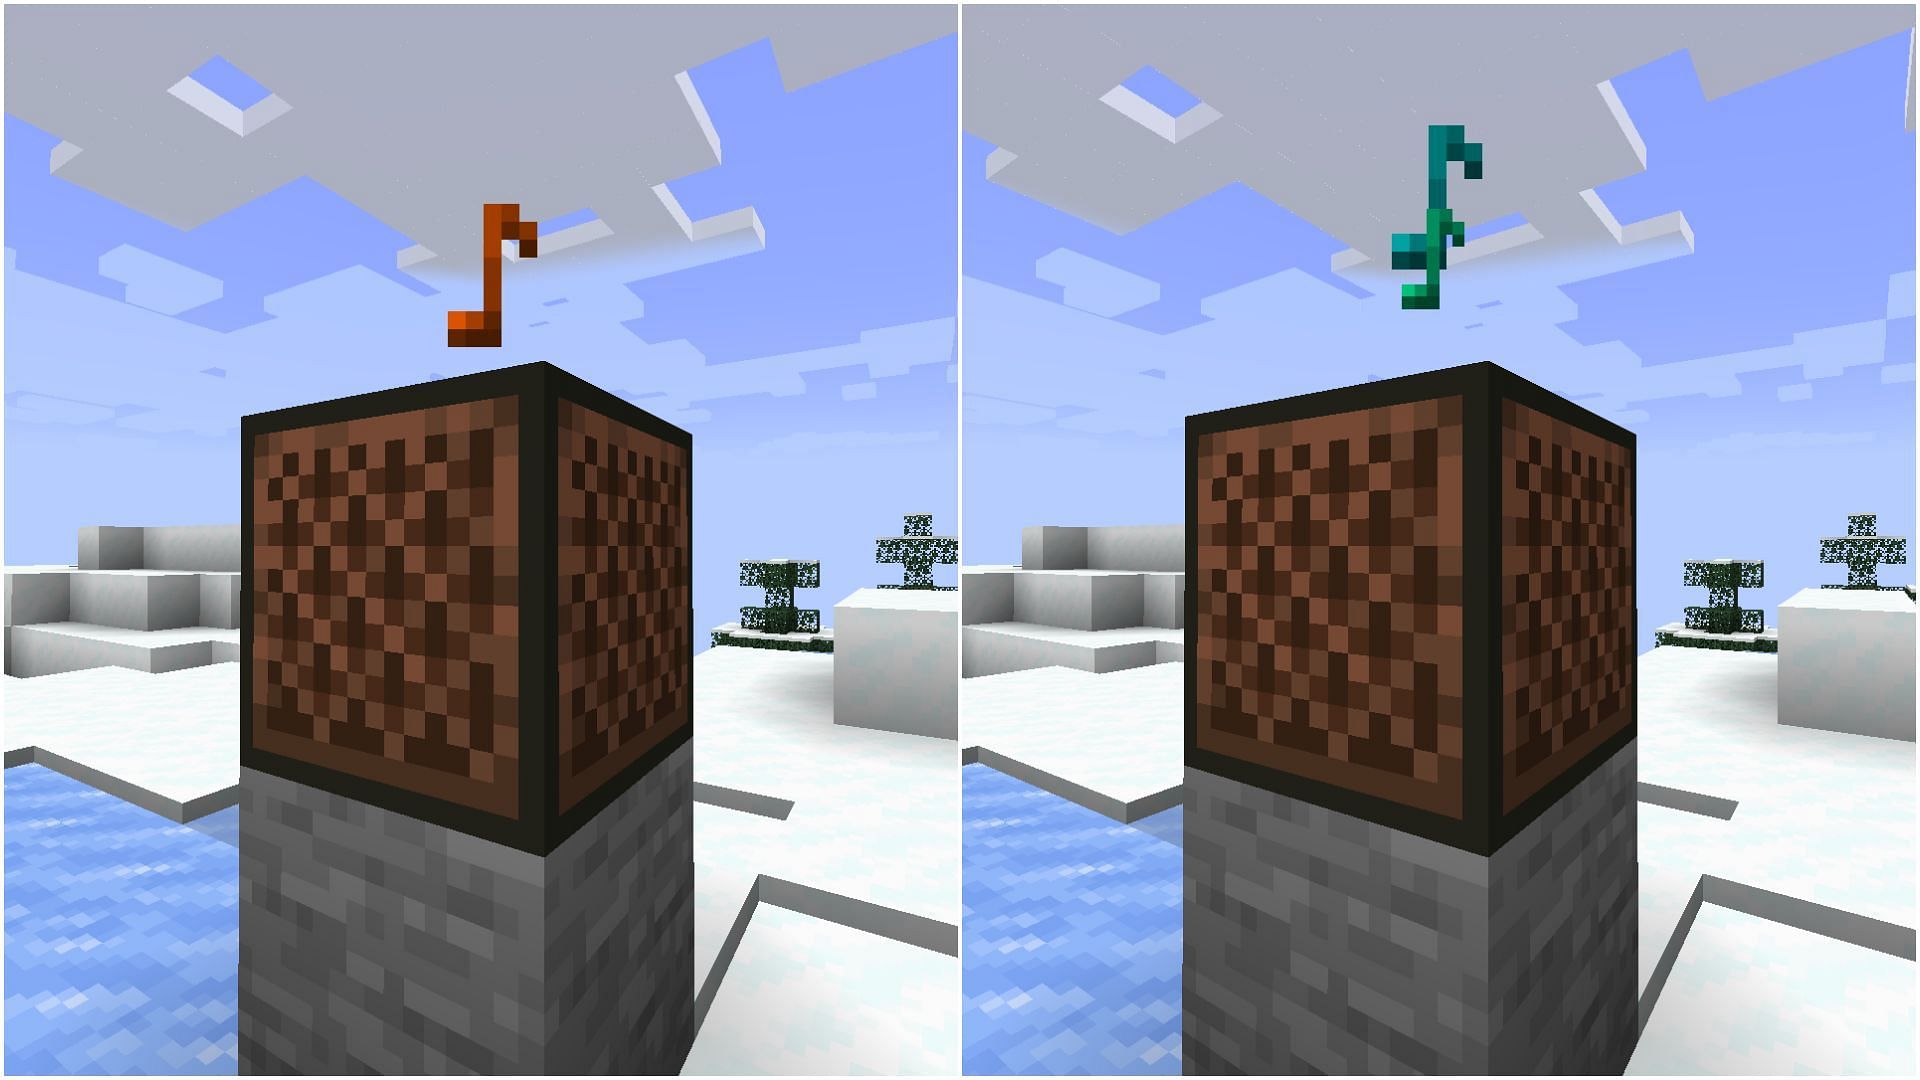 Different pitches of an instrument can be determined by the color of musical note particles in Minecraft (Image via Mojang)